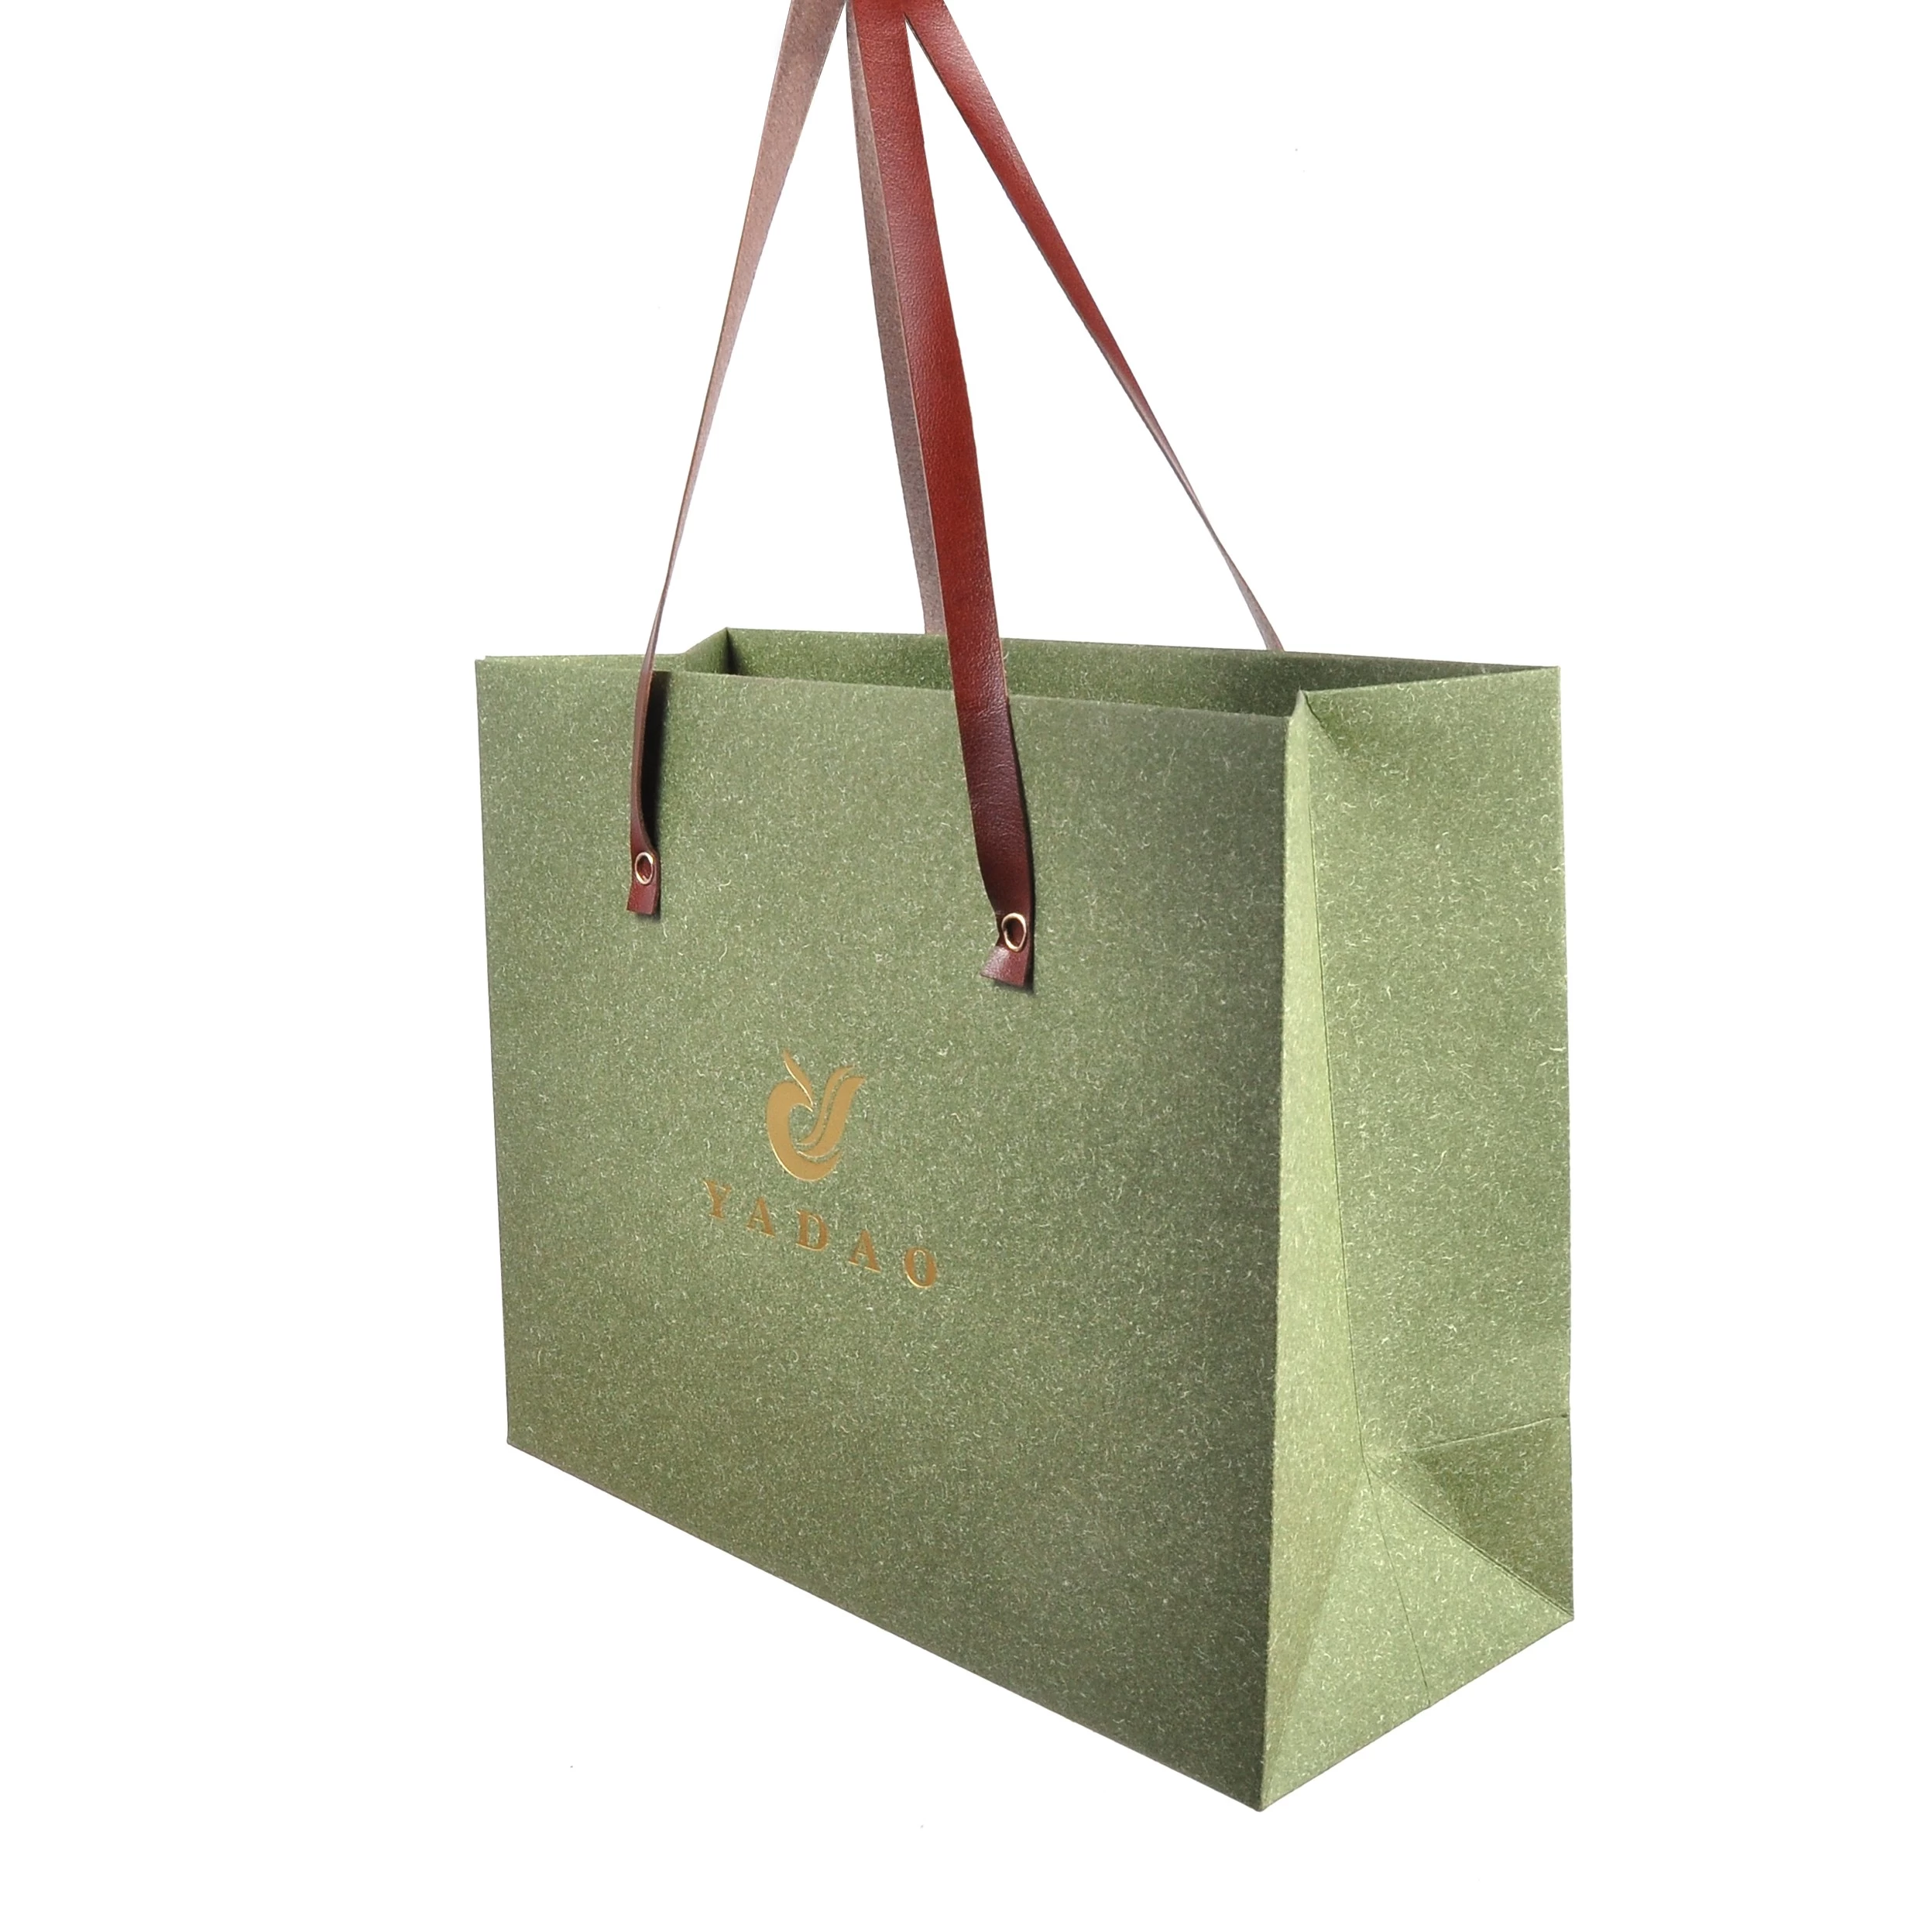 Personalized paper shopping bag for jewelry or gift packaging with leather handle